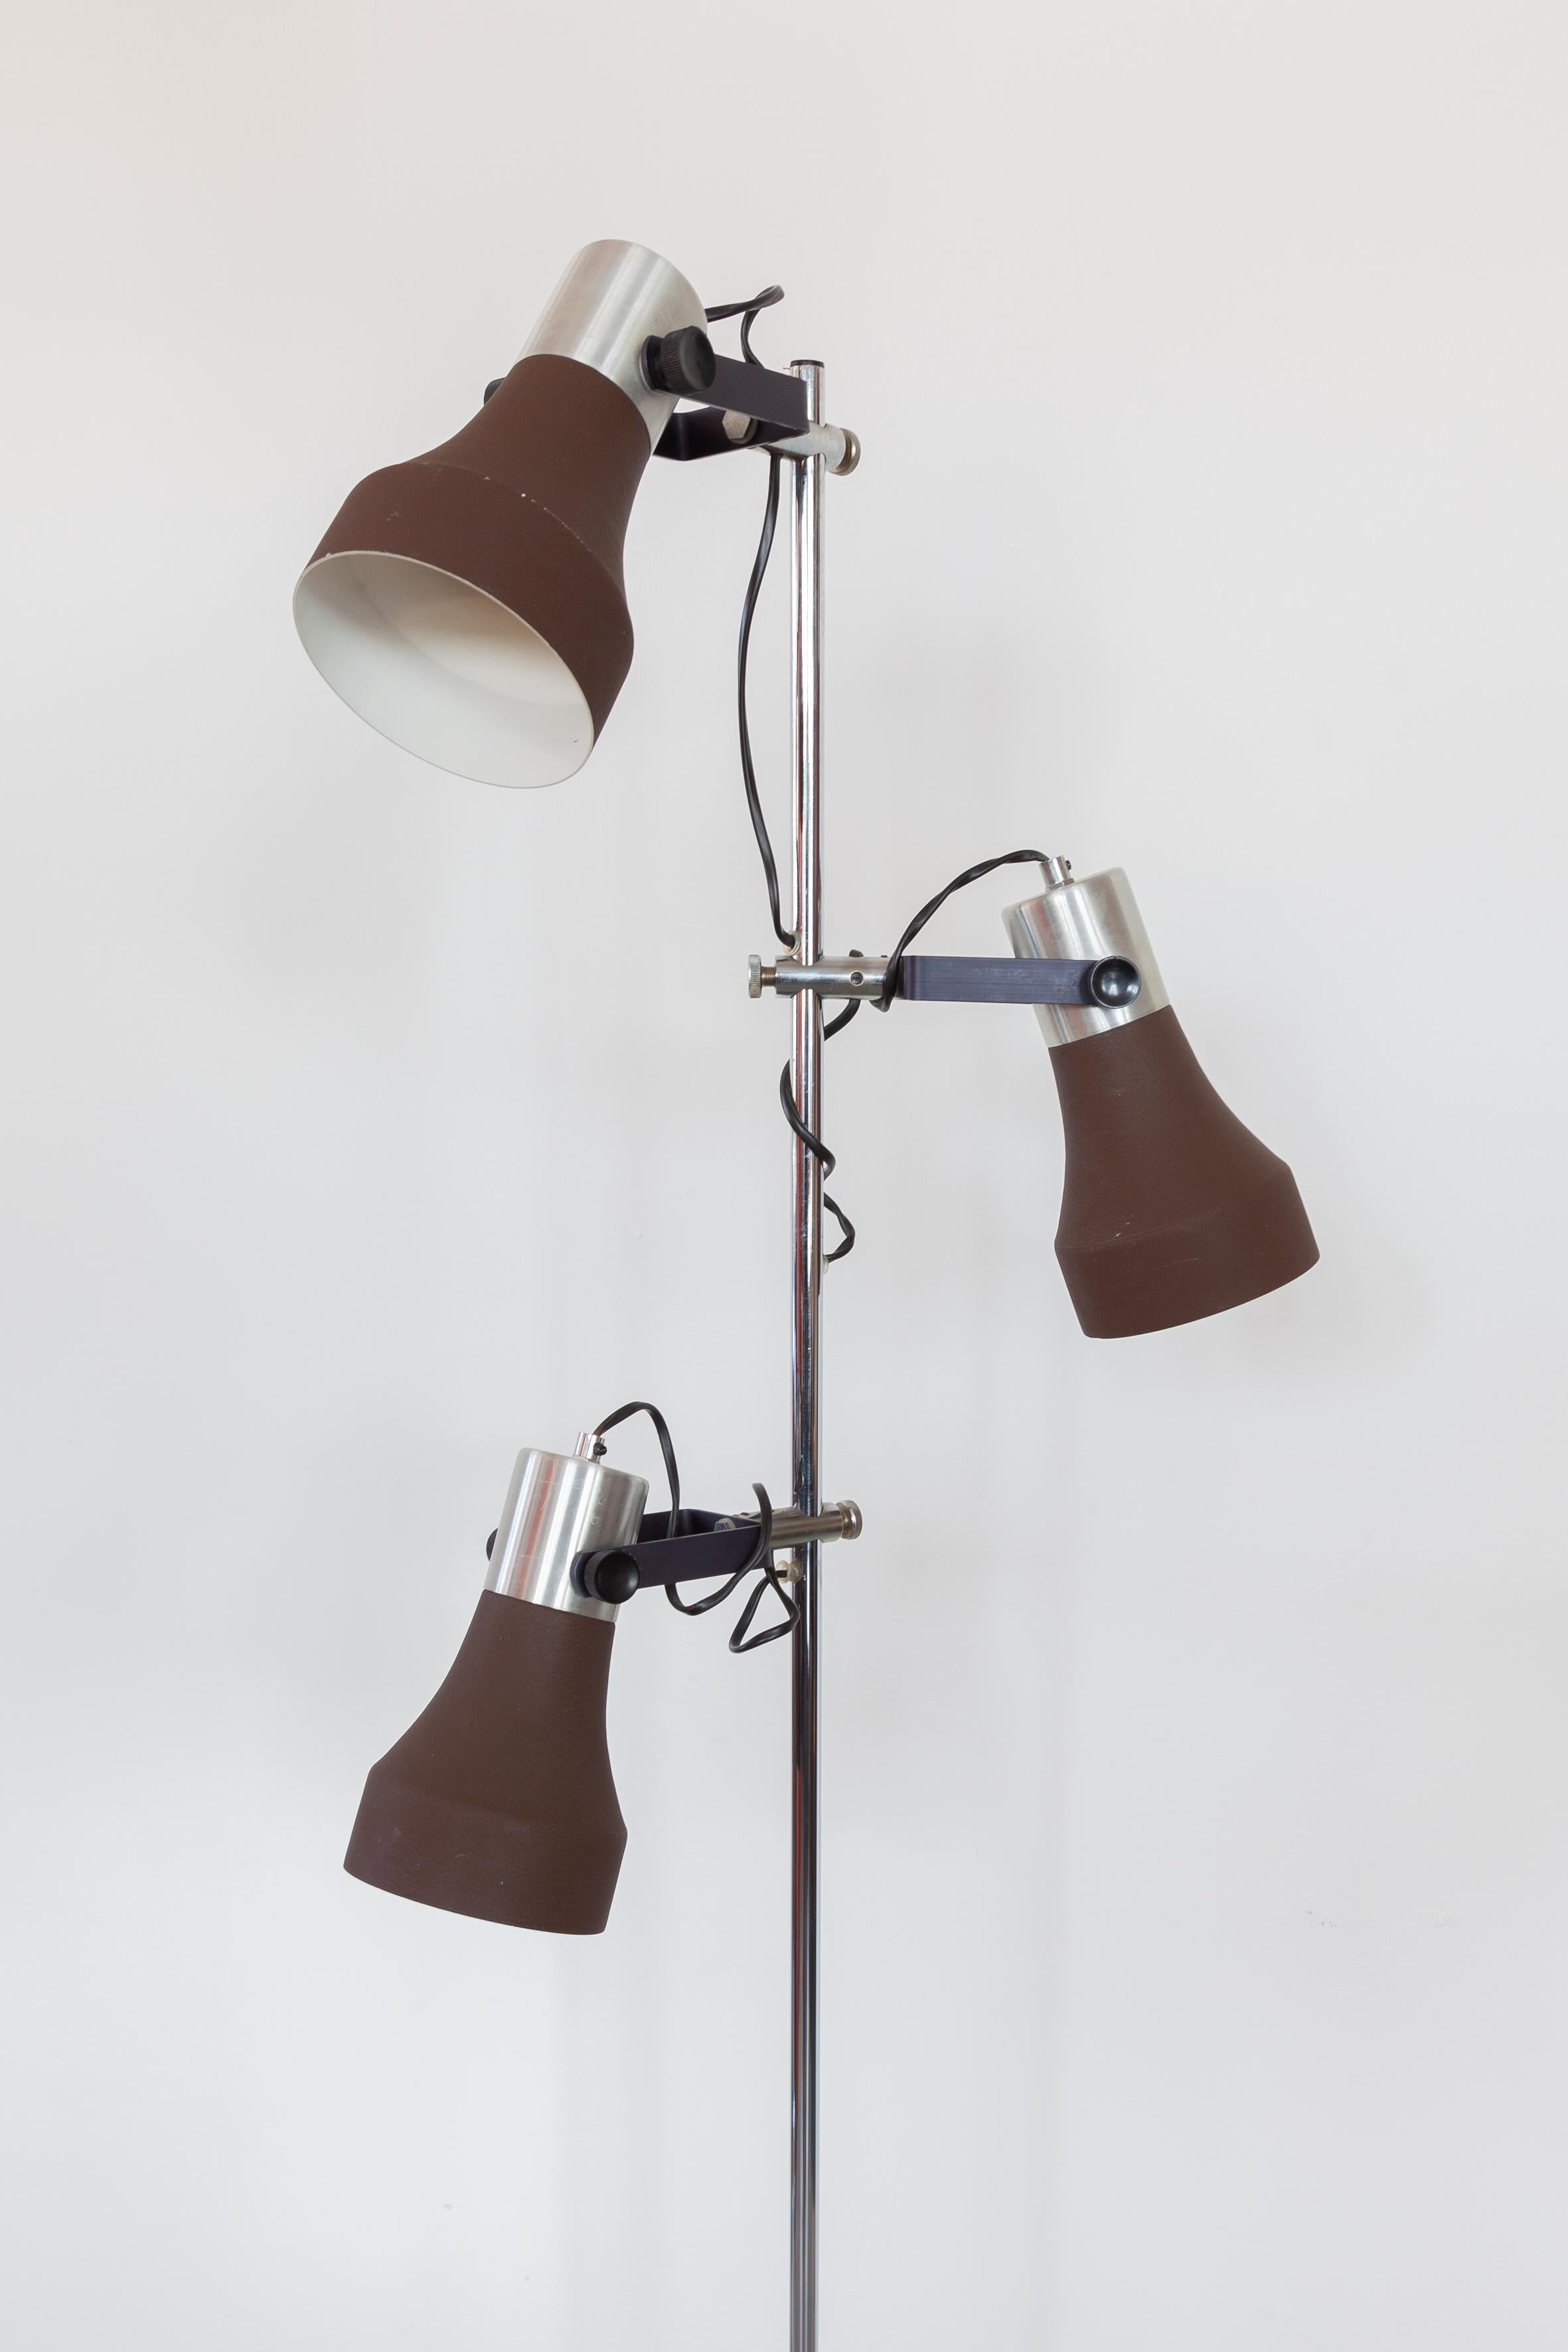 Lacquered Vintage Freestanding Floor Lamp with Three Adjustable Spots